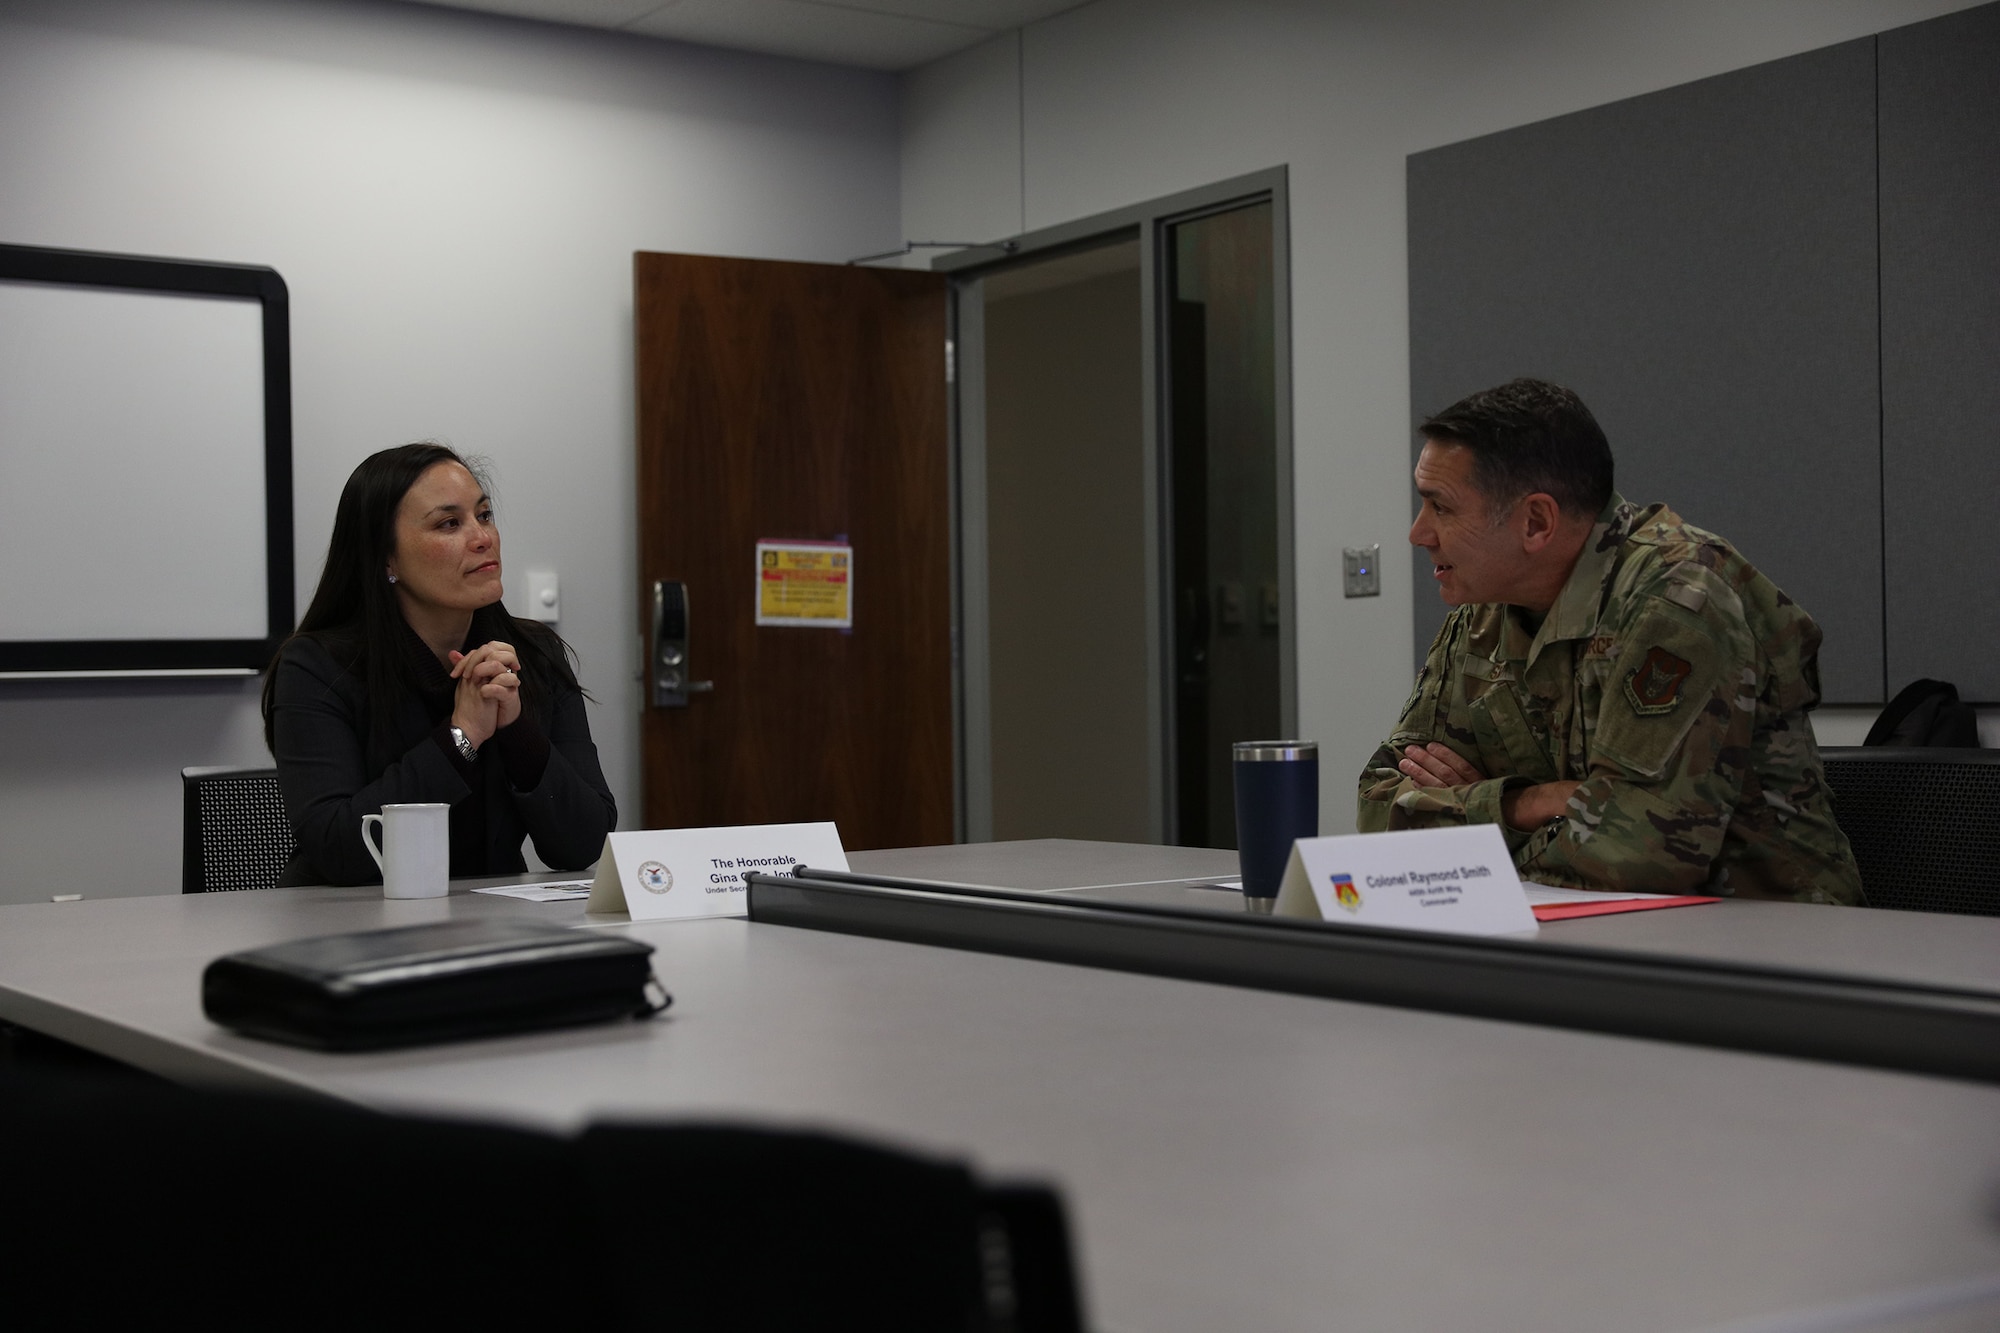 Col. Raymond A. Smith Jr., 445th Airlift Wing commander, talks about the mission of the 445th Airlift Wing to the Honorable Gina Ortiz Jones, Under Secretary of the Air Force during her visit to Wright-Patterson Air Force Base, Ohio Jan. 9, 2023.